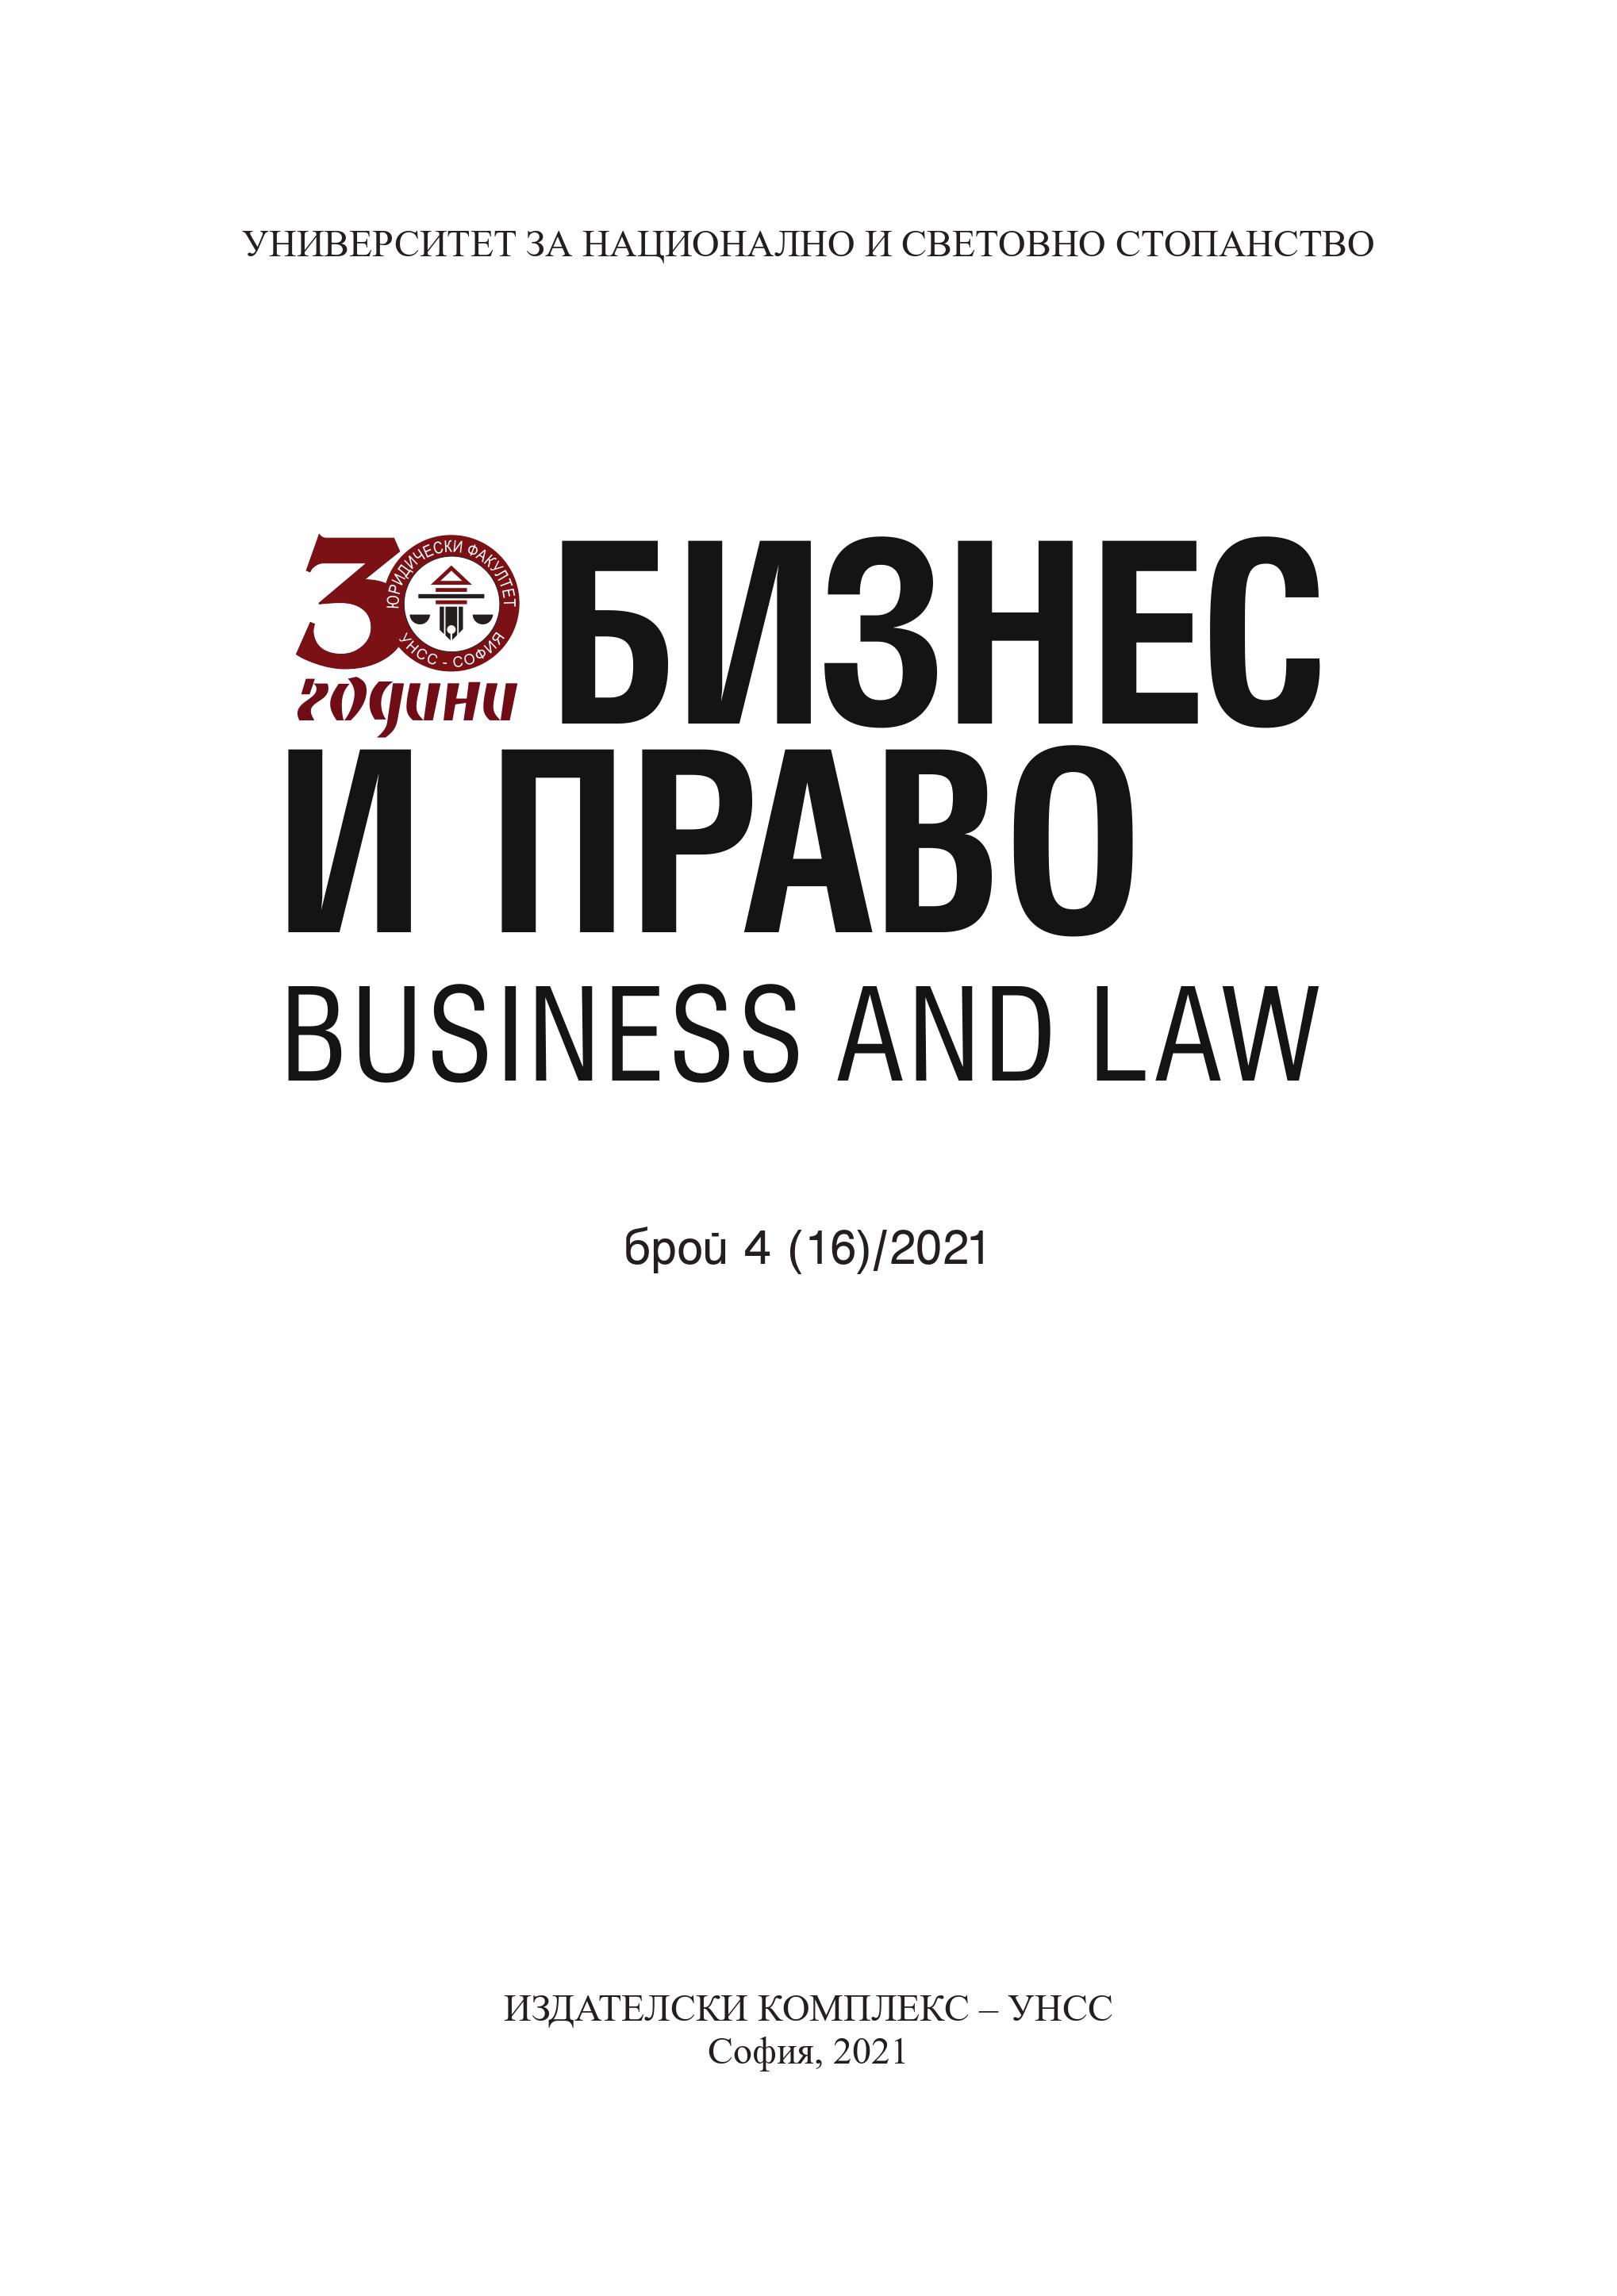 Evolution of the Institute of Confiscation of Property in Bulgarian Legislation and Application of the "Non bis in idem" Principle Cover Image